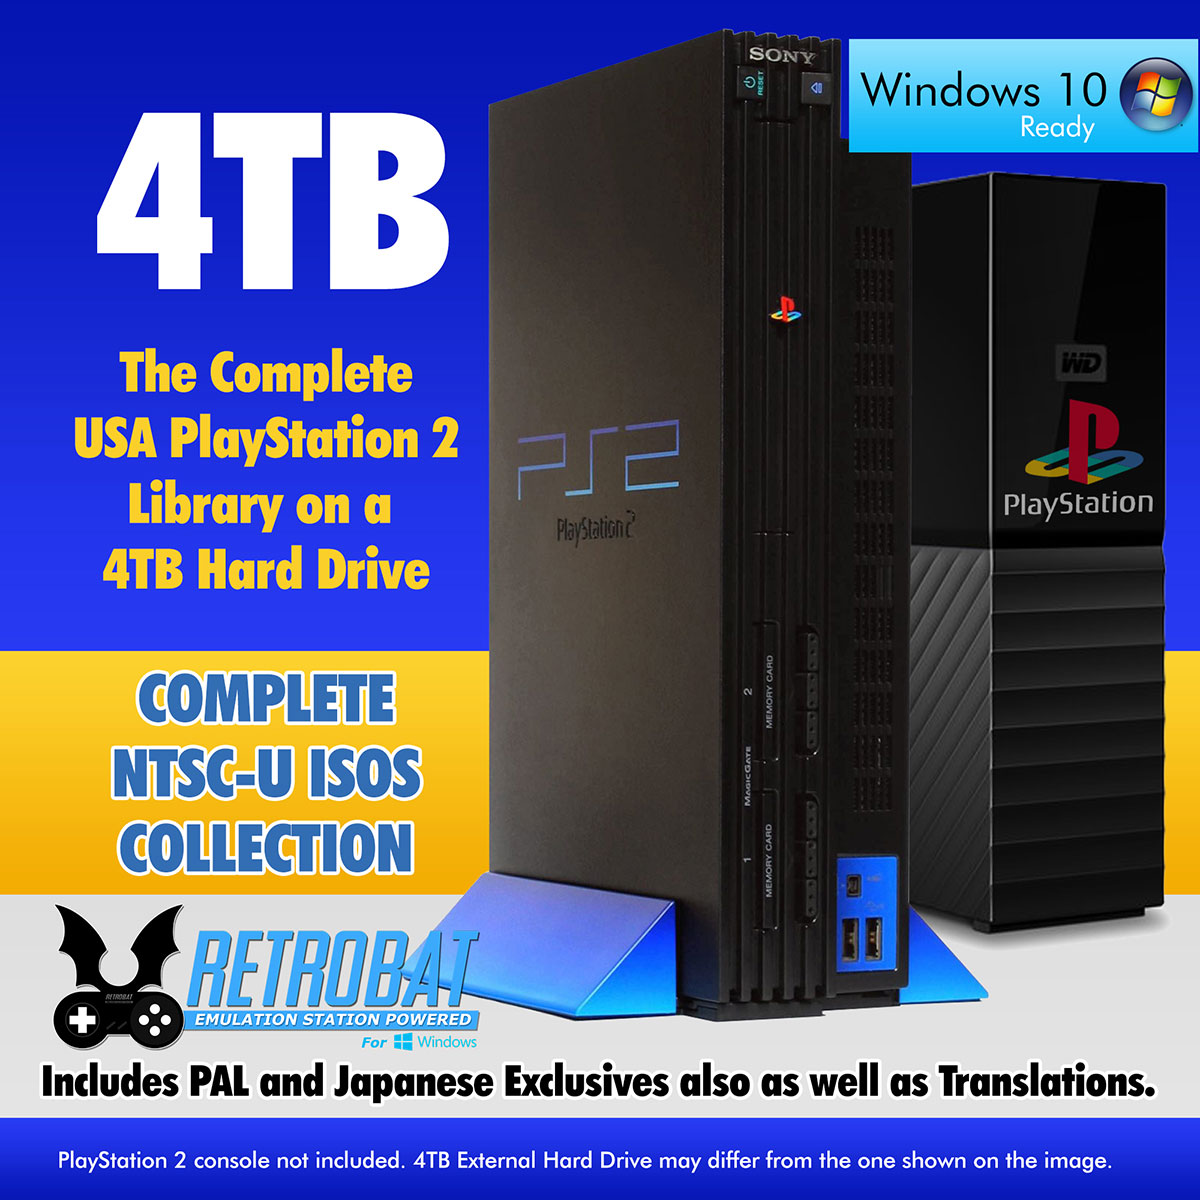 How to Transfer and Play PS1 games on PS2 Internal hdd 